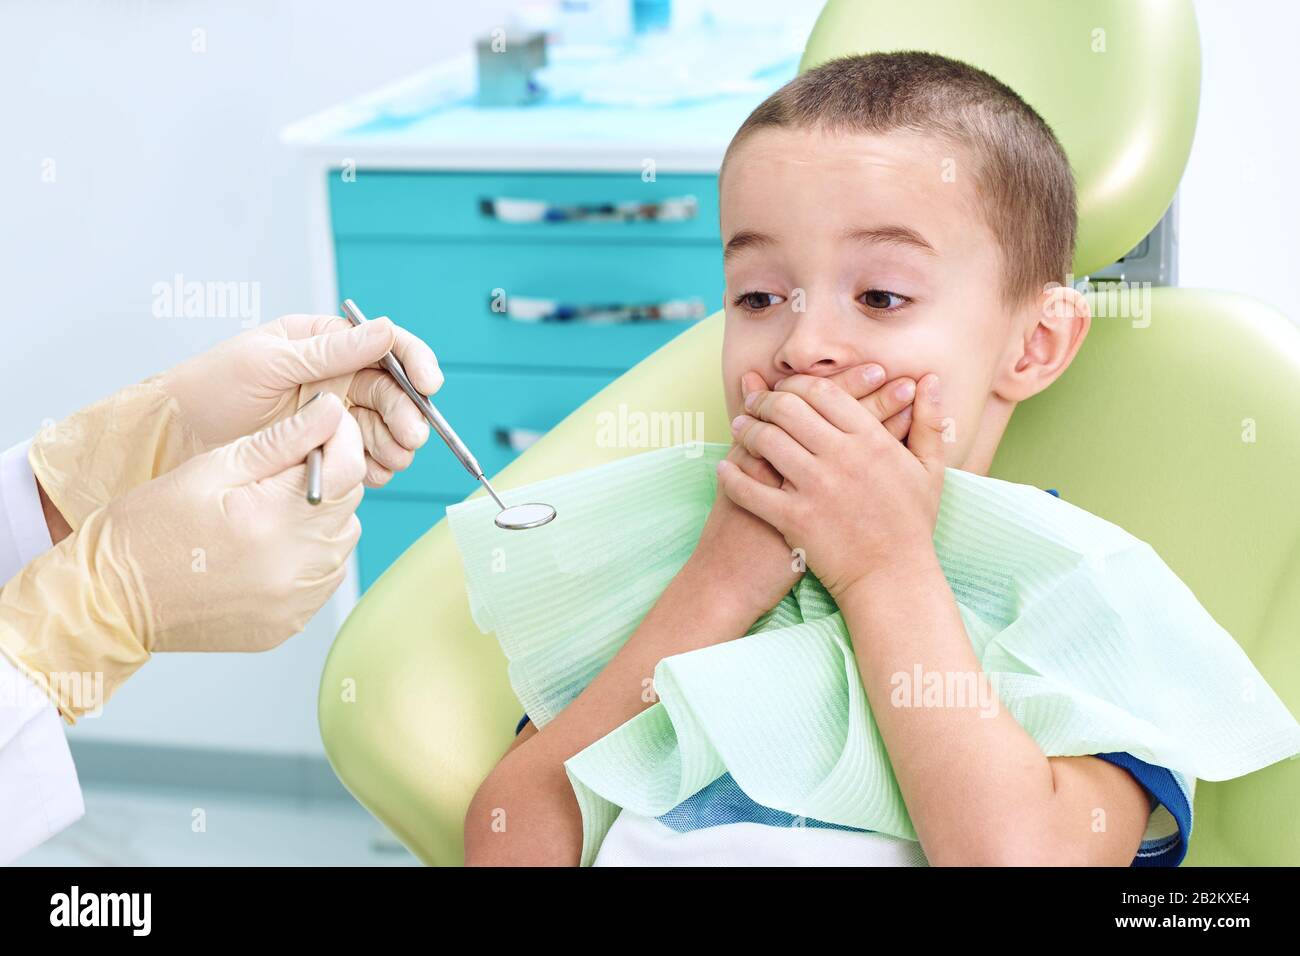 Portrait of a scared child in a dental chair. The boy covers his mouth with his hands, afraid of being examined by a dentist. Children's dentistry. Stock Photo